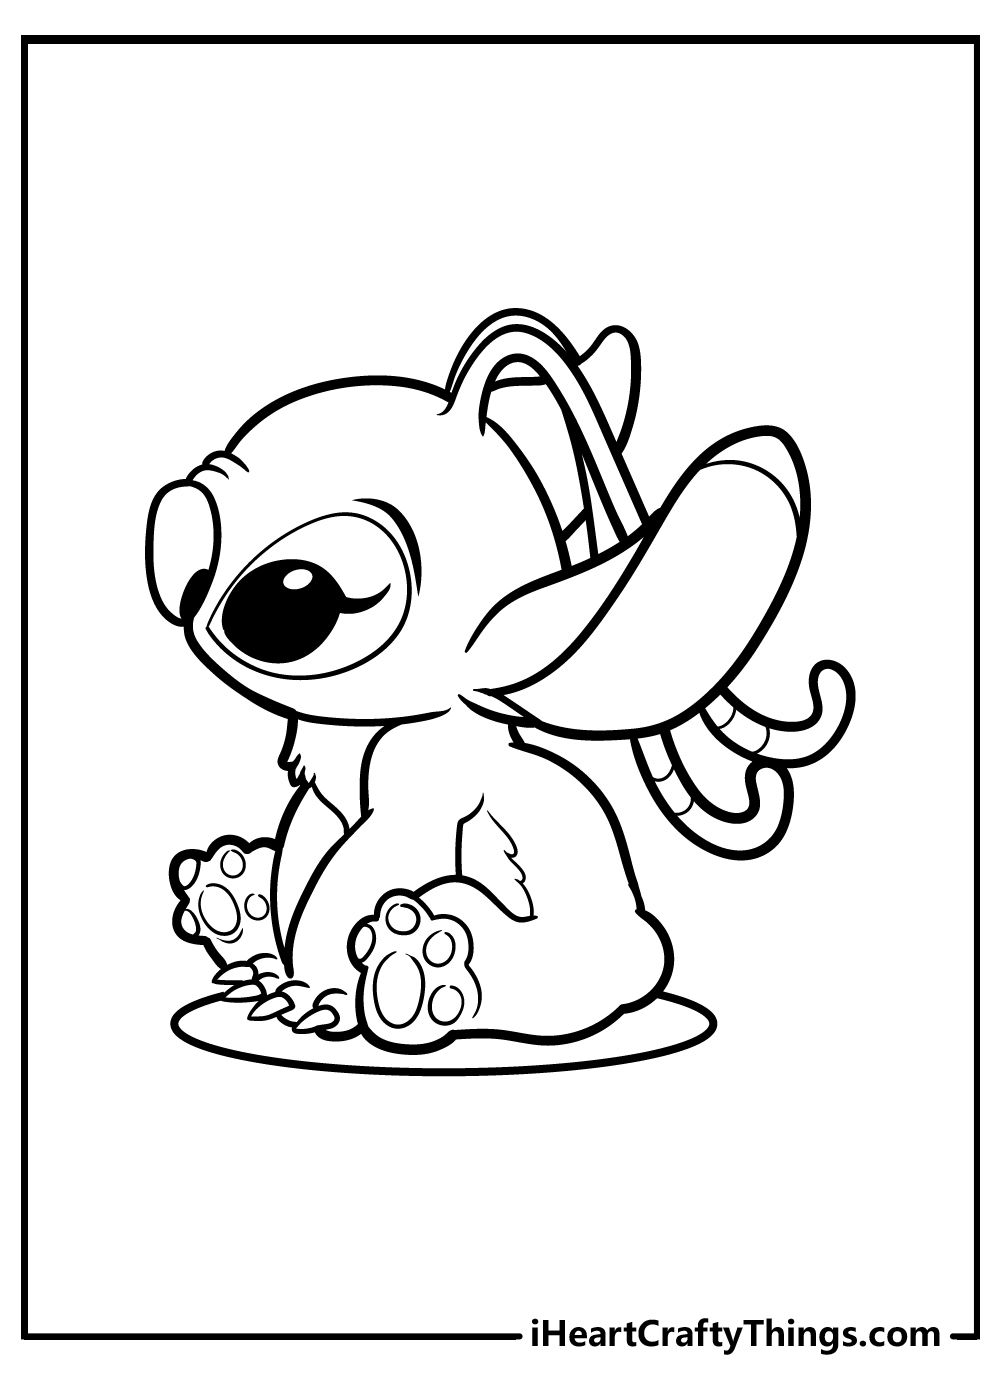 Lilo and stitch coloring pages stitch coloring pages lilo and stitch drawings angel coloring pages